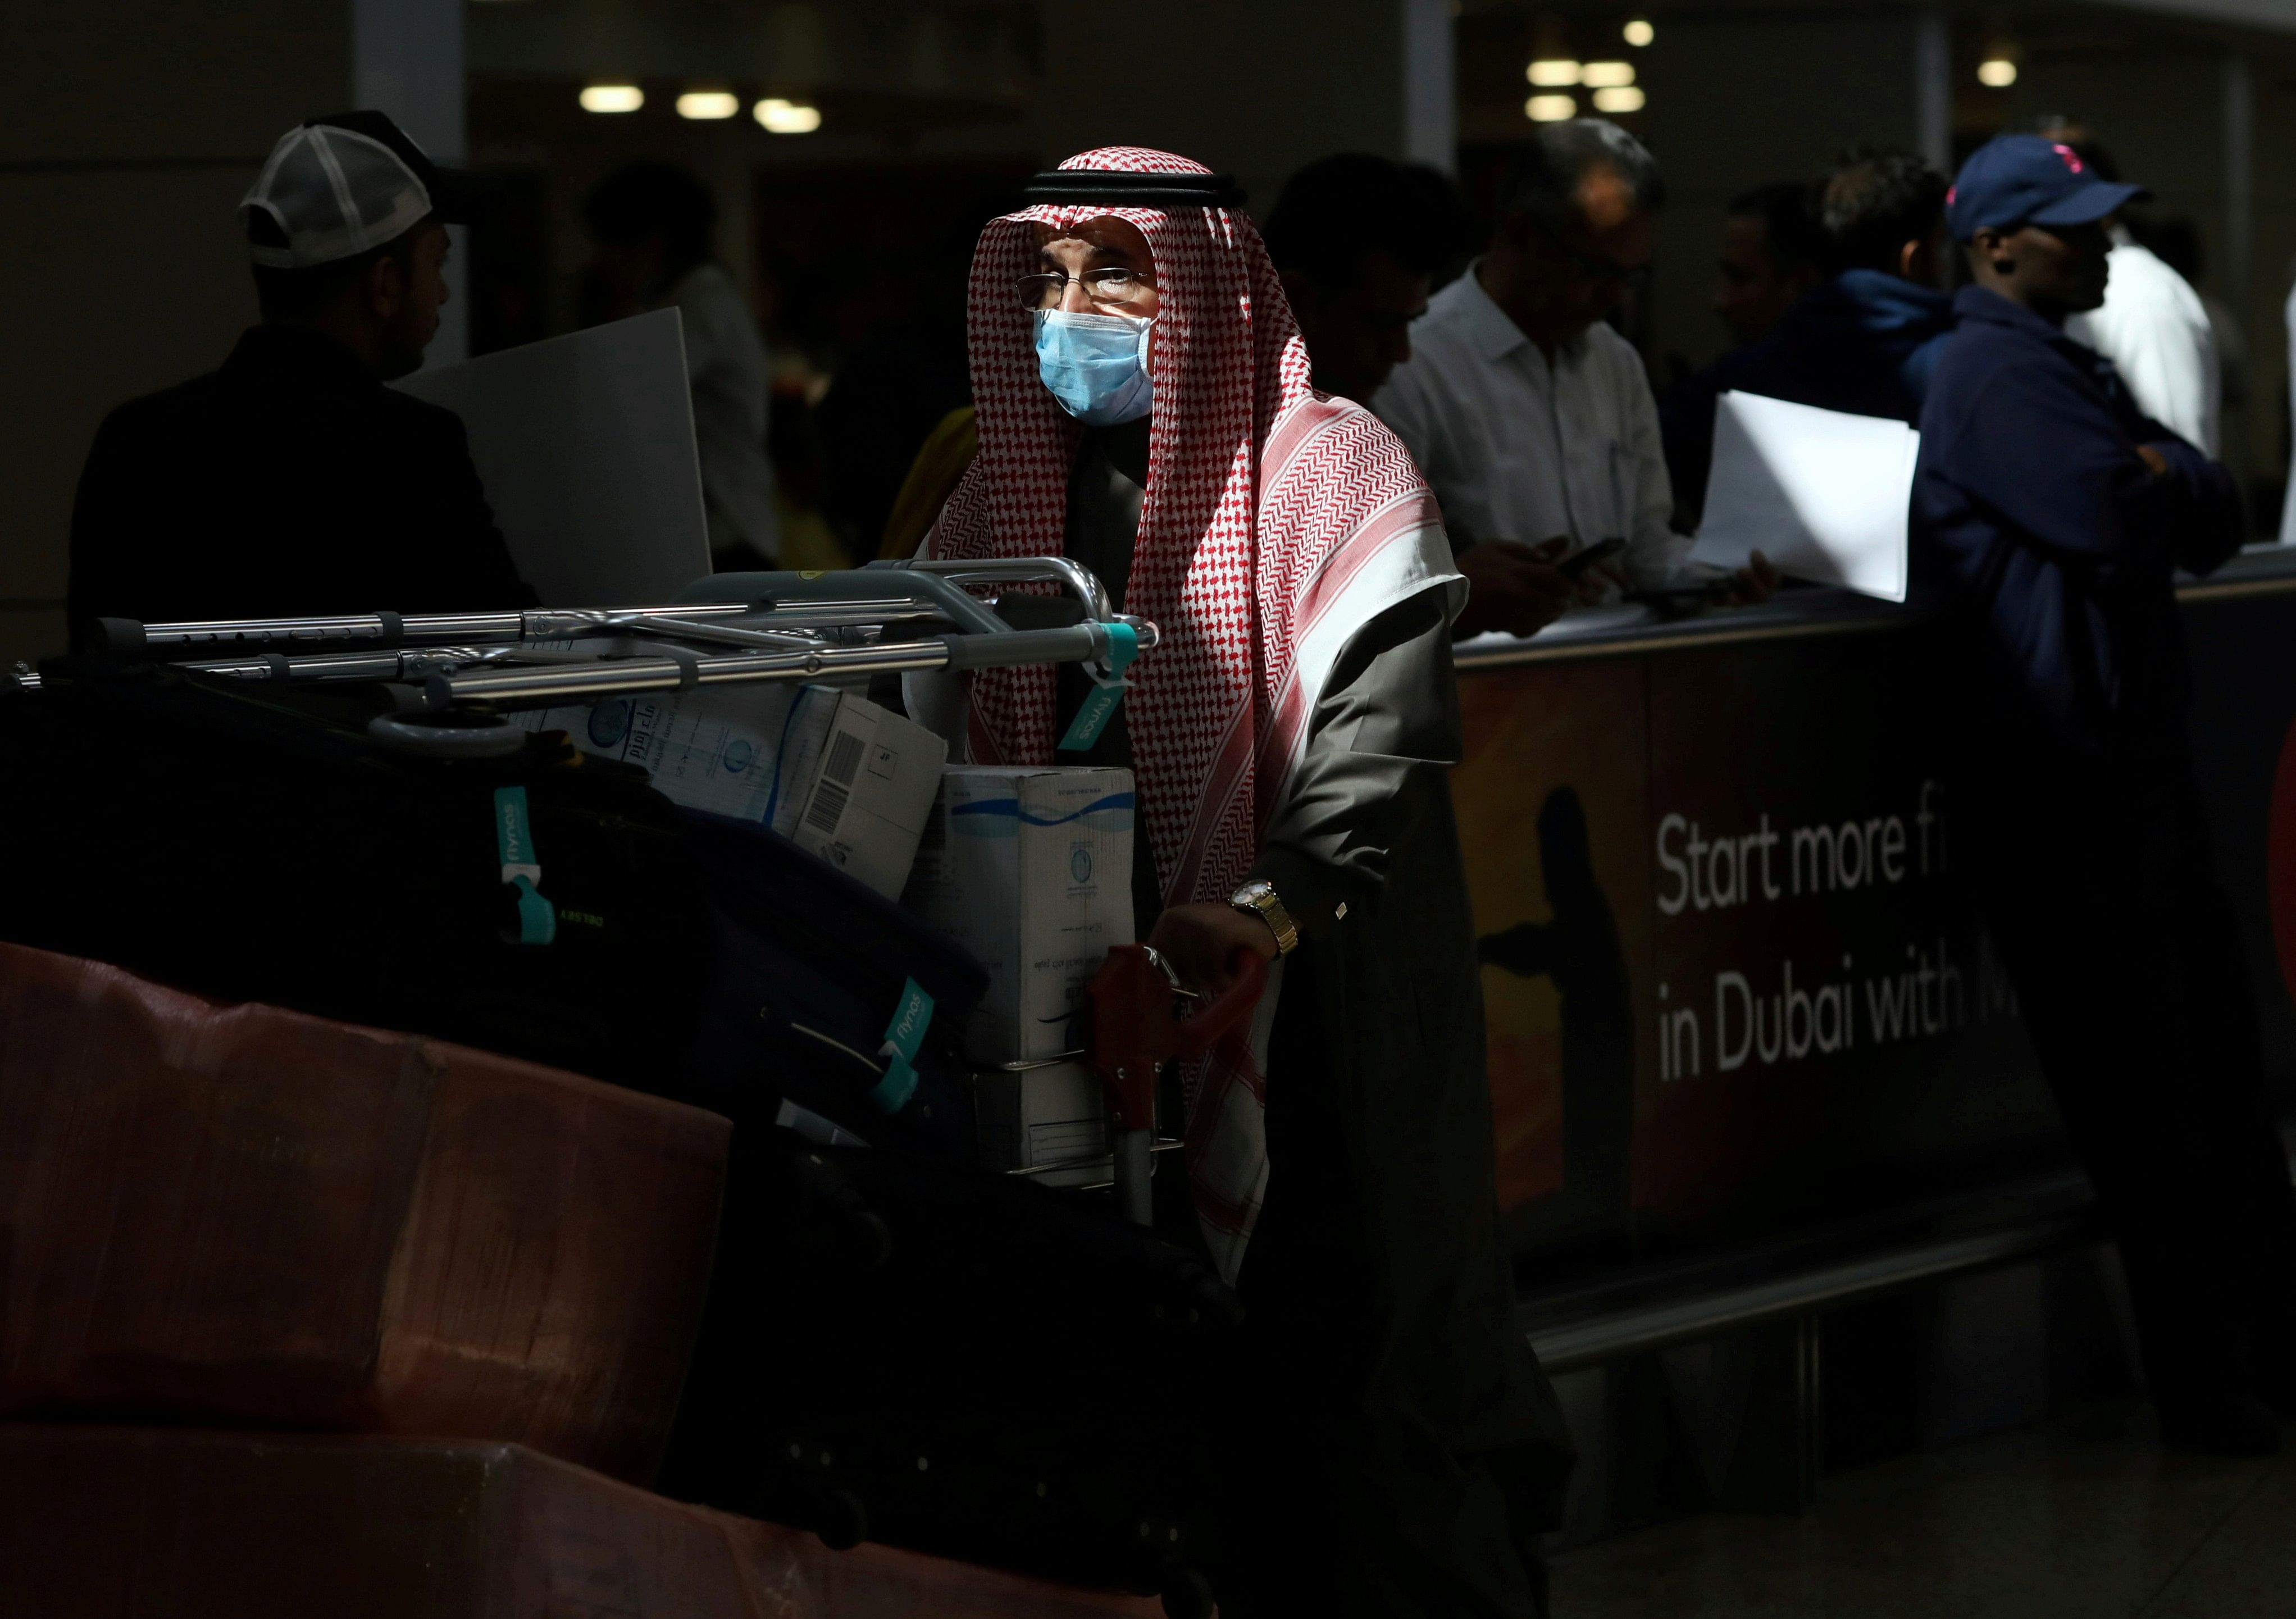 A traveller wears a mask as he pushes a cart with luggage at Dubai International Airport. (Credit: Reuters)